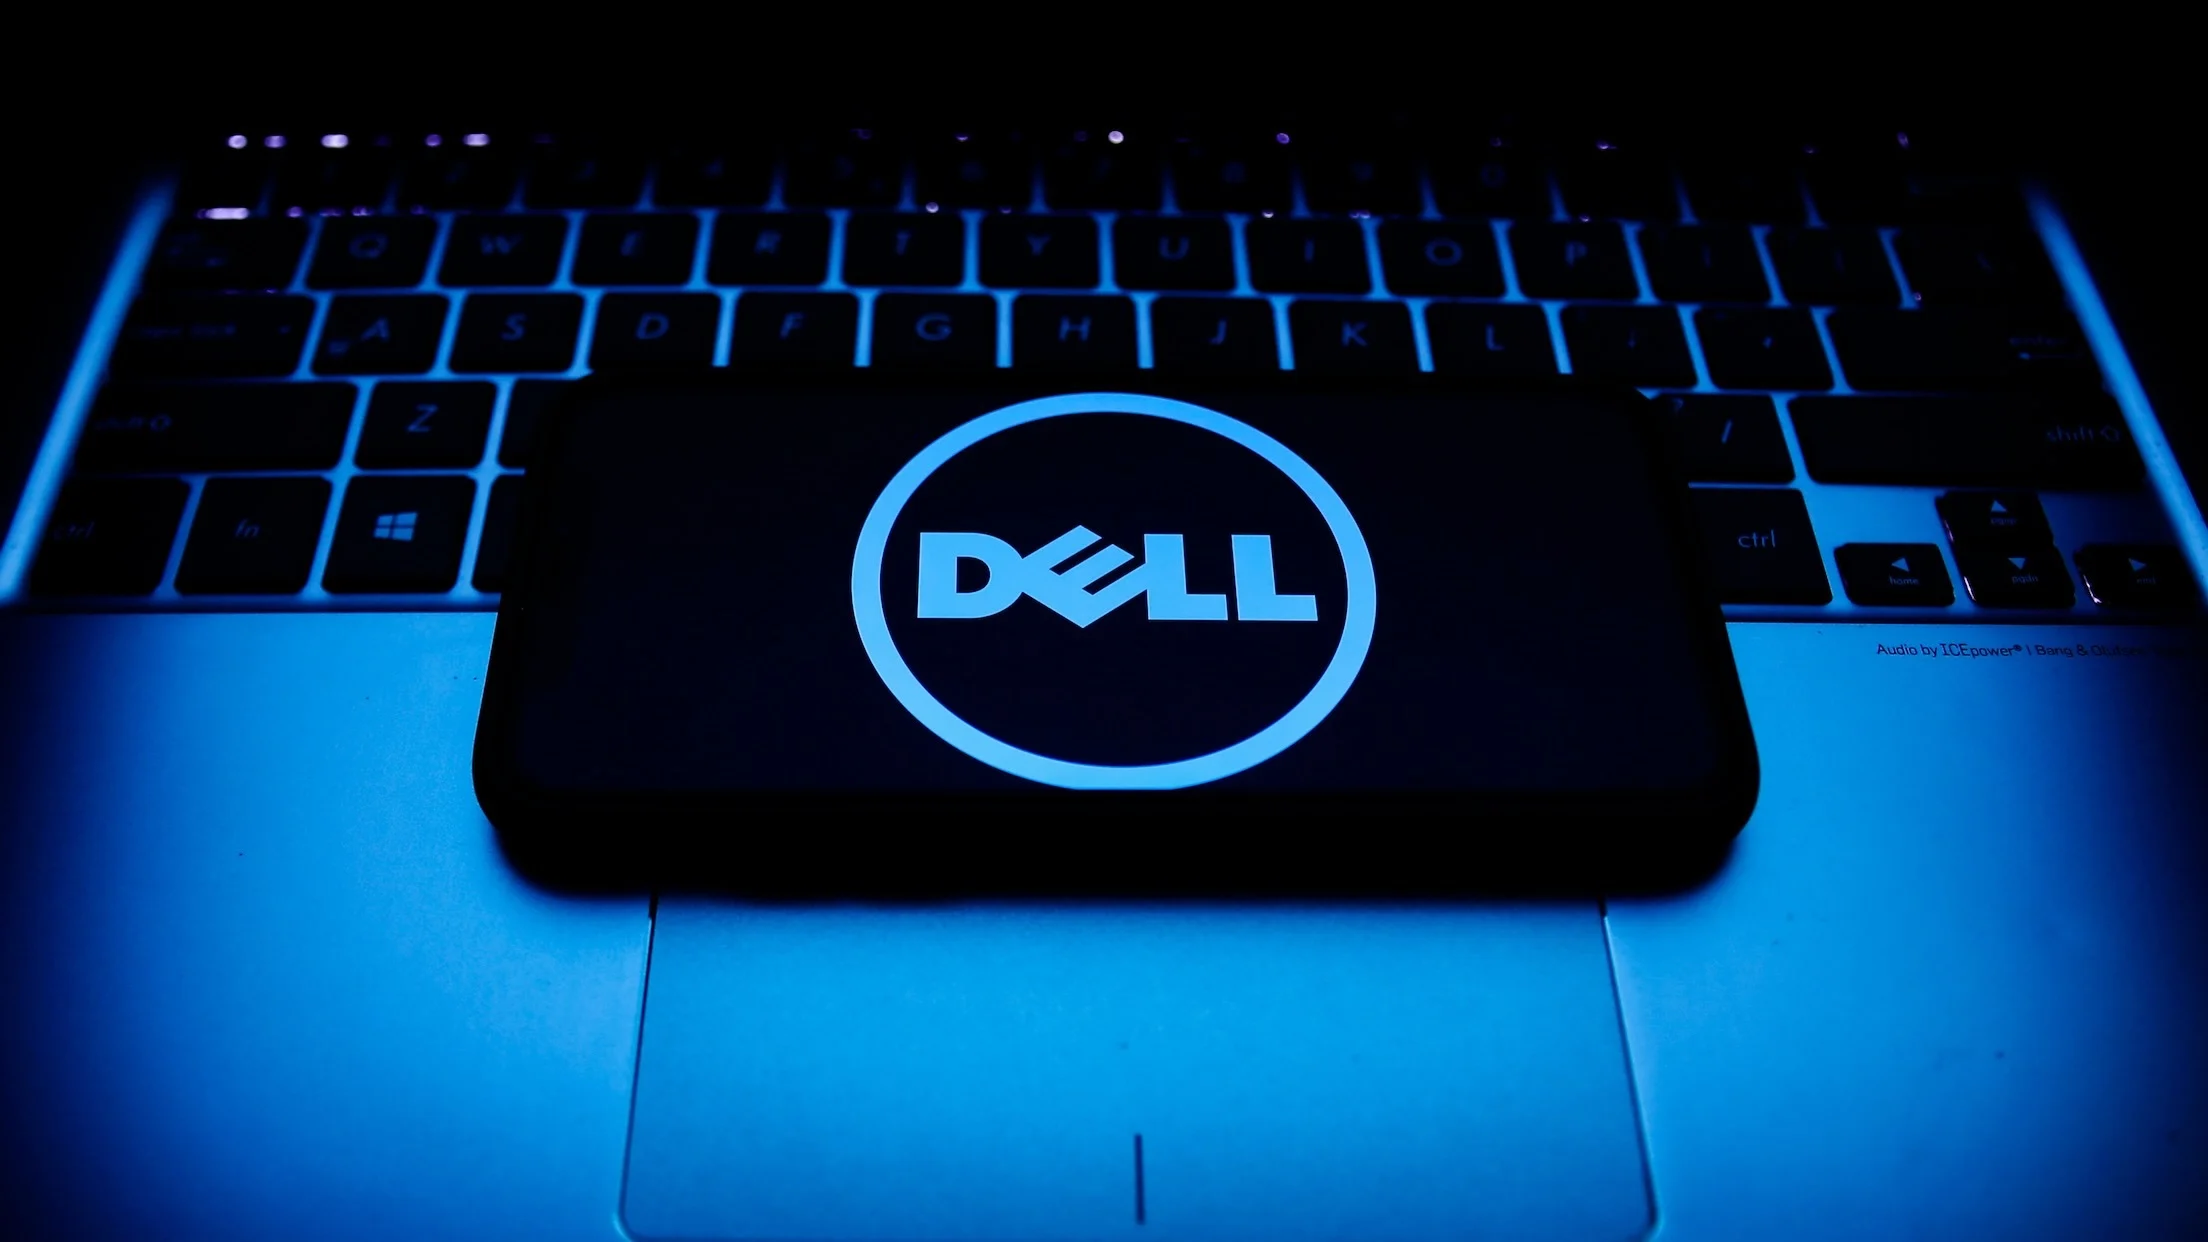 Breaking News: Dell's Data Leak Hits 49 Million Users – What You Need to Know About Your Safety